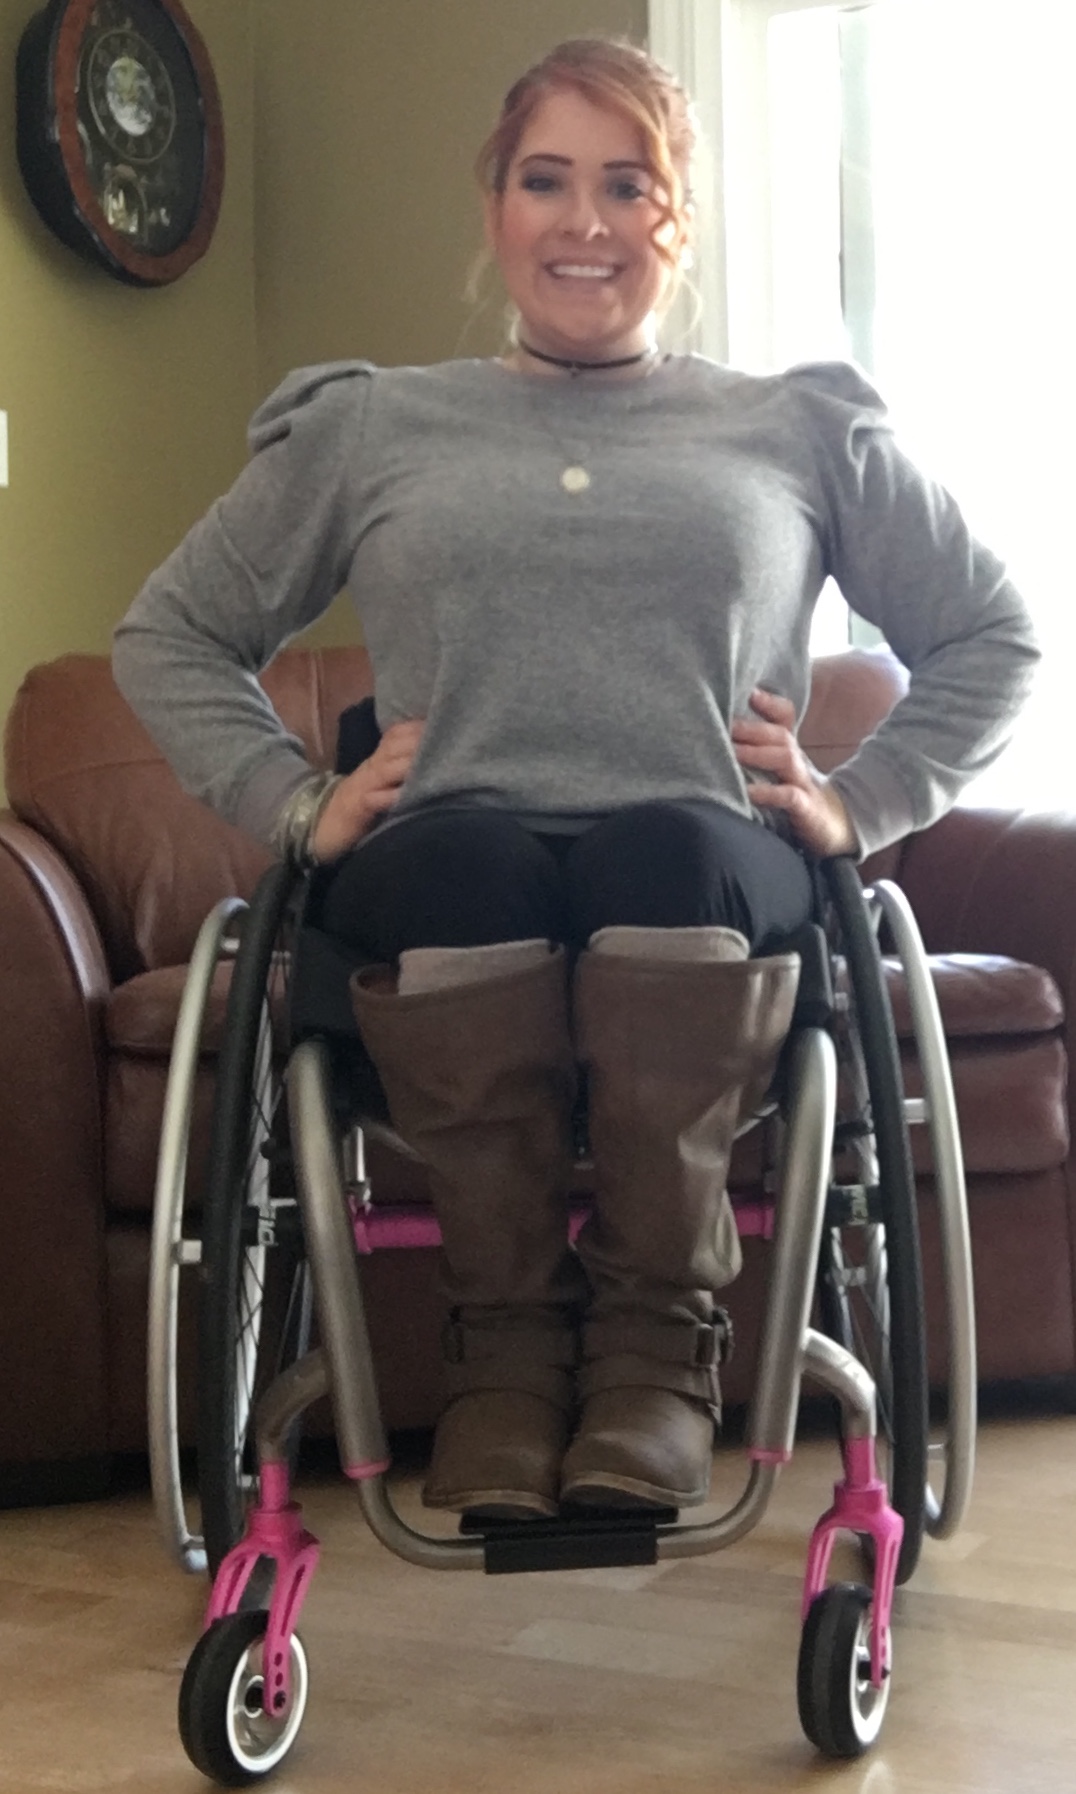 Sarah in her new wheelchair, which she named Athena, a goddess, but also a warrior.